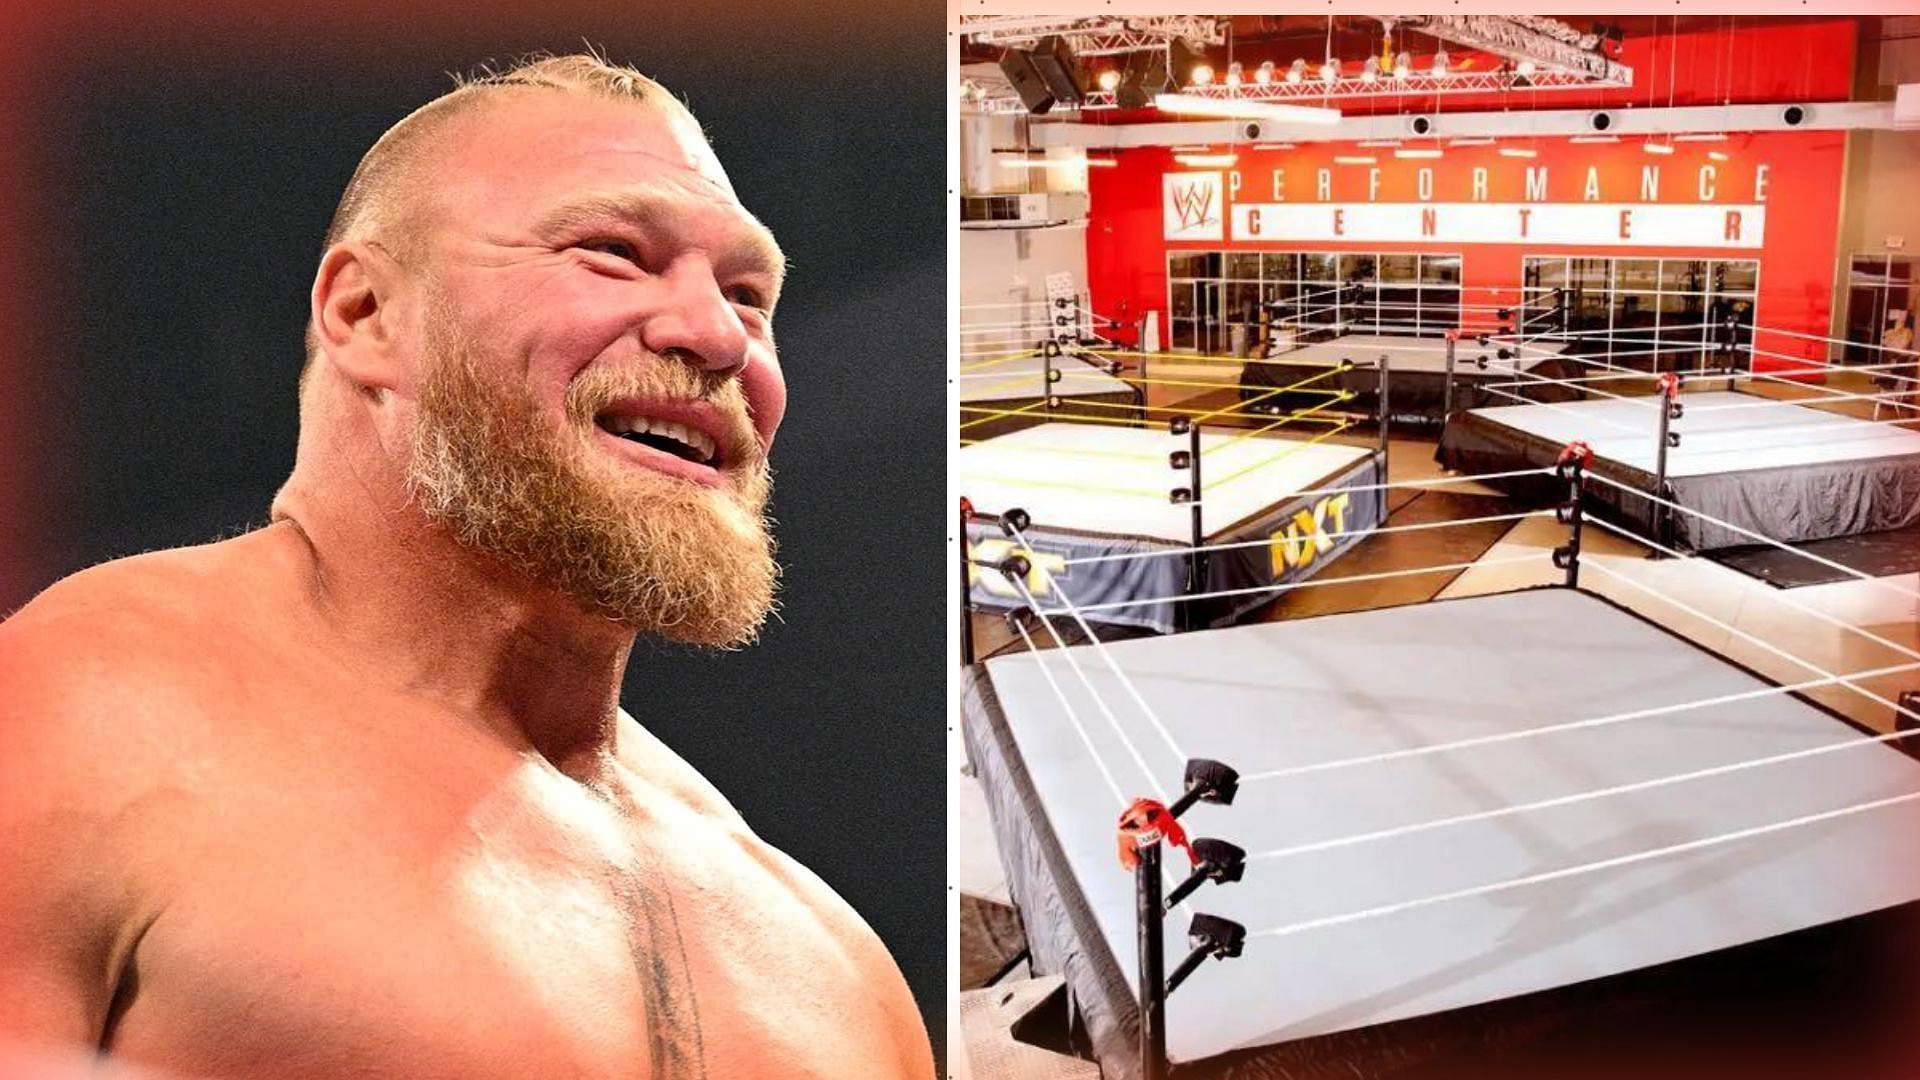 Brock Lesnar has made a name for himself since he left OVW